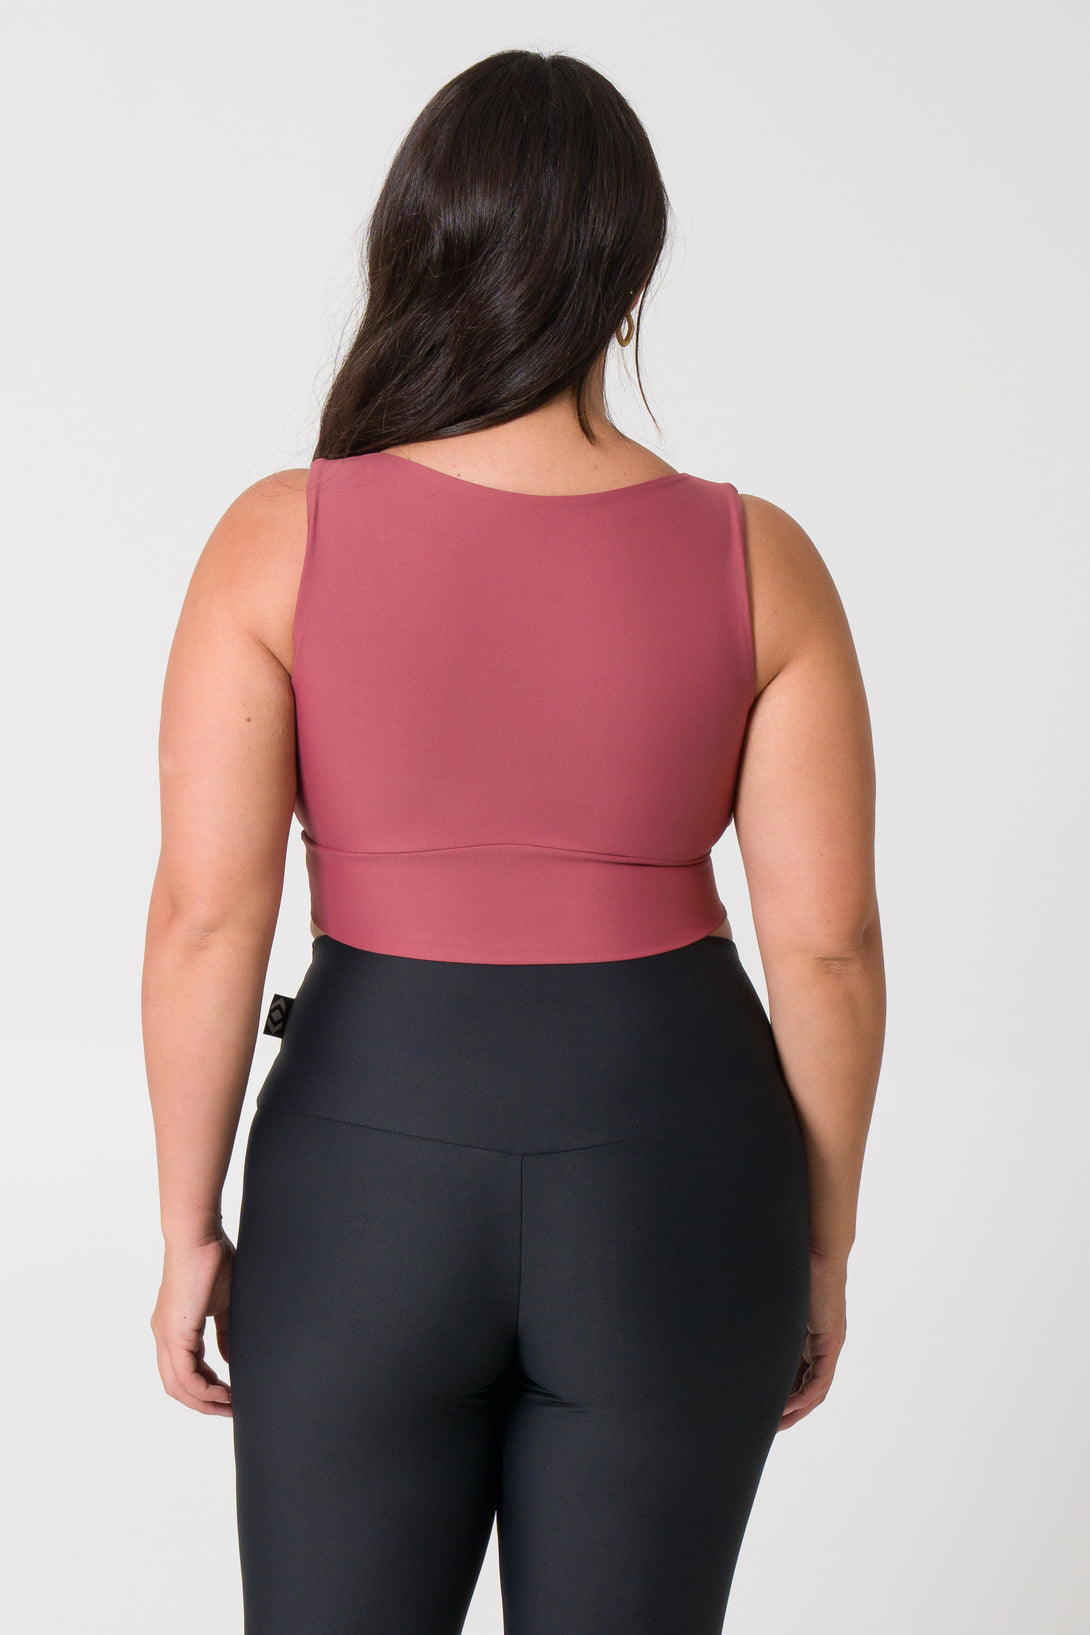 Blush reversible comfort crop top, designed for active women who seek both functionality and fashion.